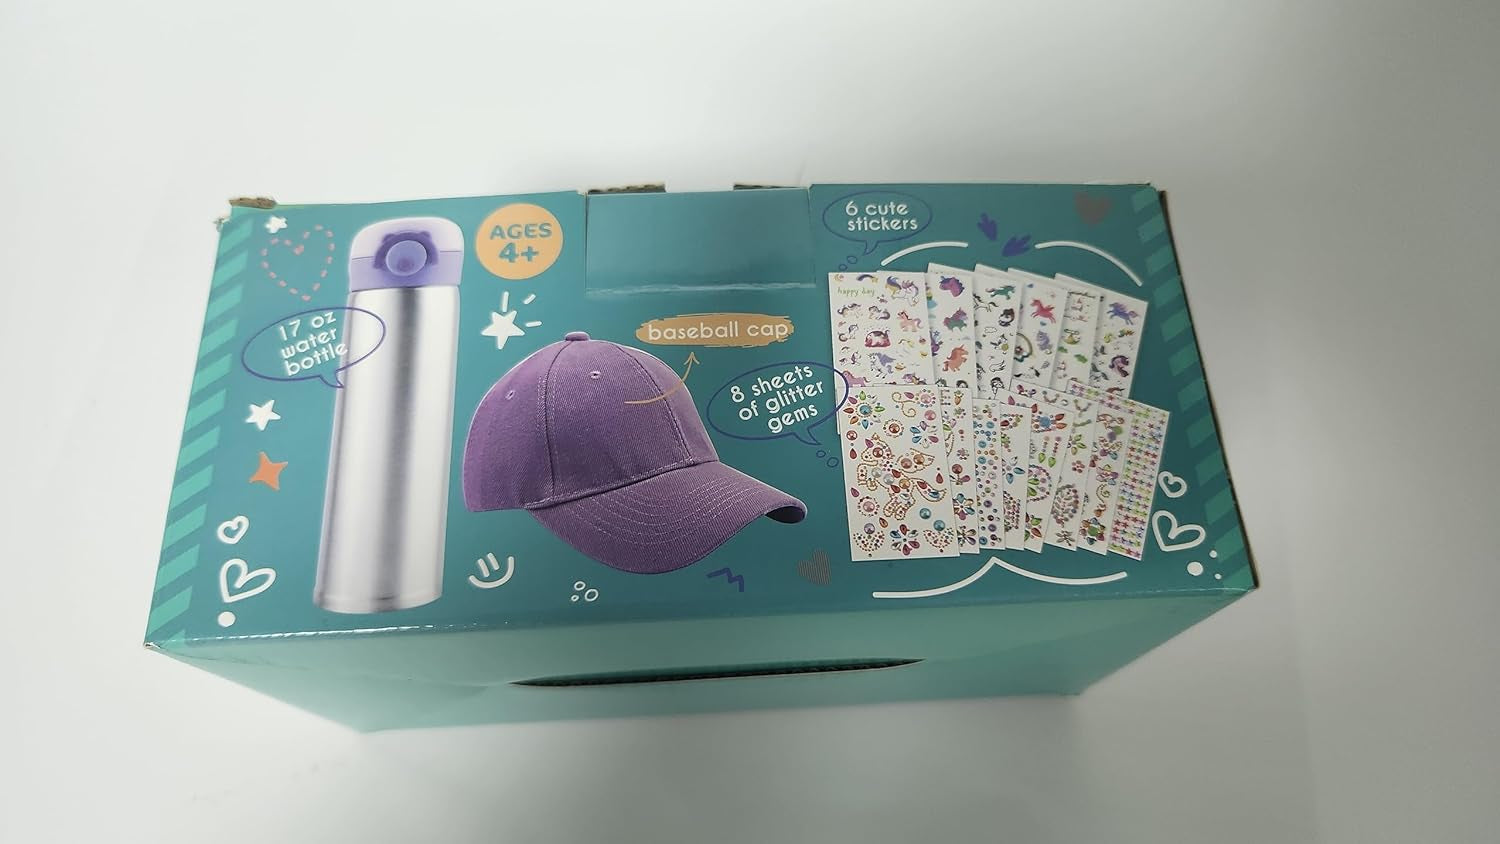 Gifts for Girls 4 5 6 7 8 9 10 Year Old DIY Water Bottle & Baseball Cap, Decorate Your Own Water Bottle with Gem & Unicorn Stickers, Valentine'S Day Birthday Present Girls Age 4-12, Cap & Bottle Craft